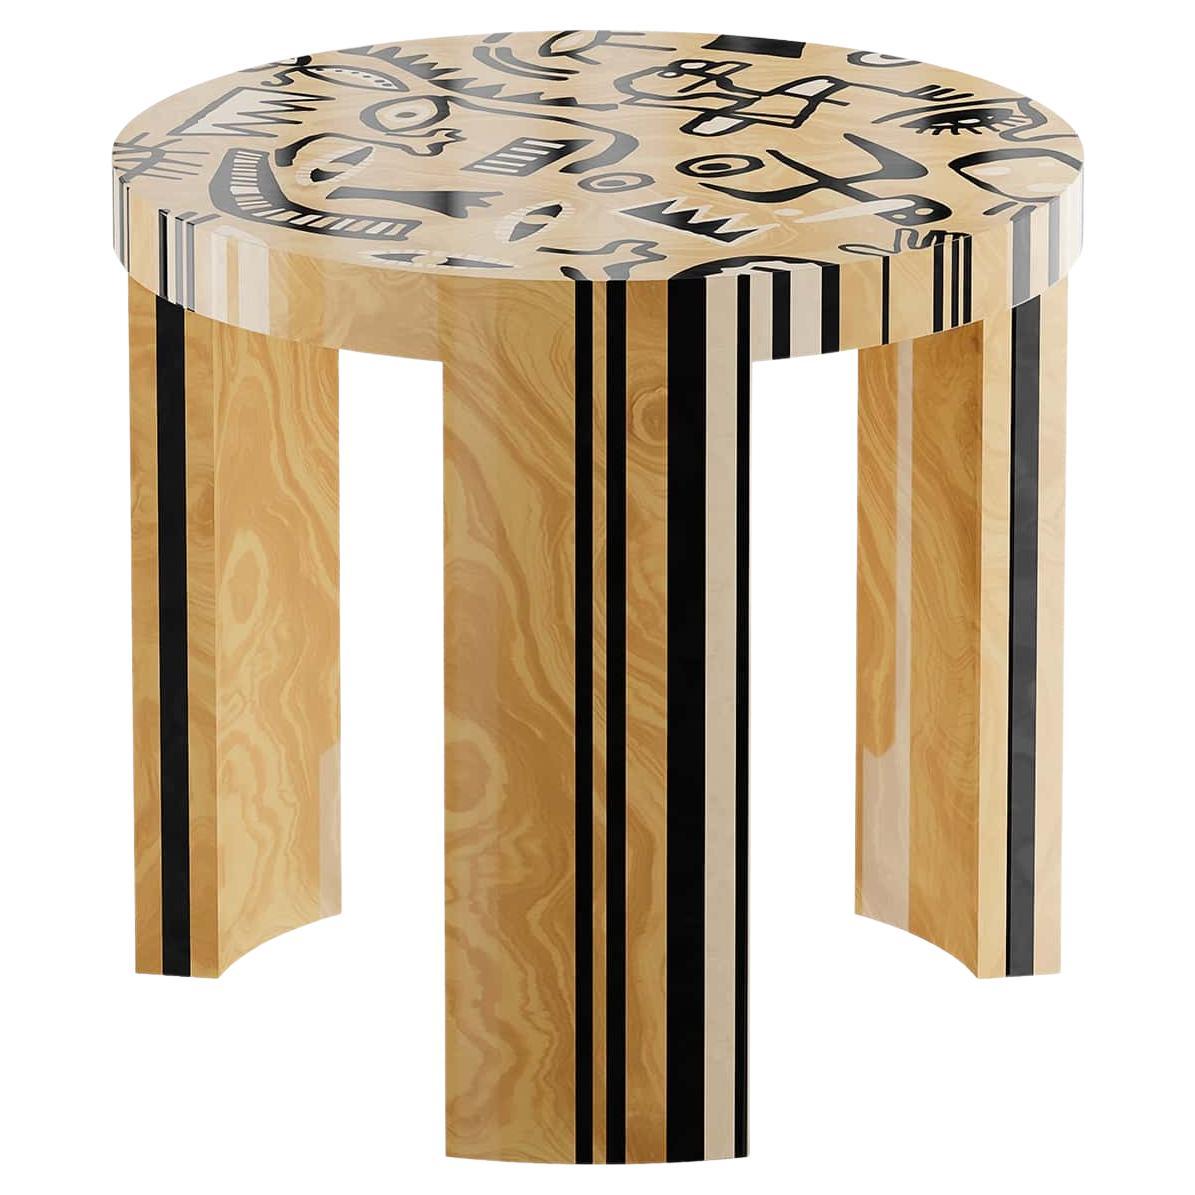 Mid-Century Modern Round Side Table Contemporary Urban Art Print Wood Marquetry